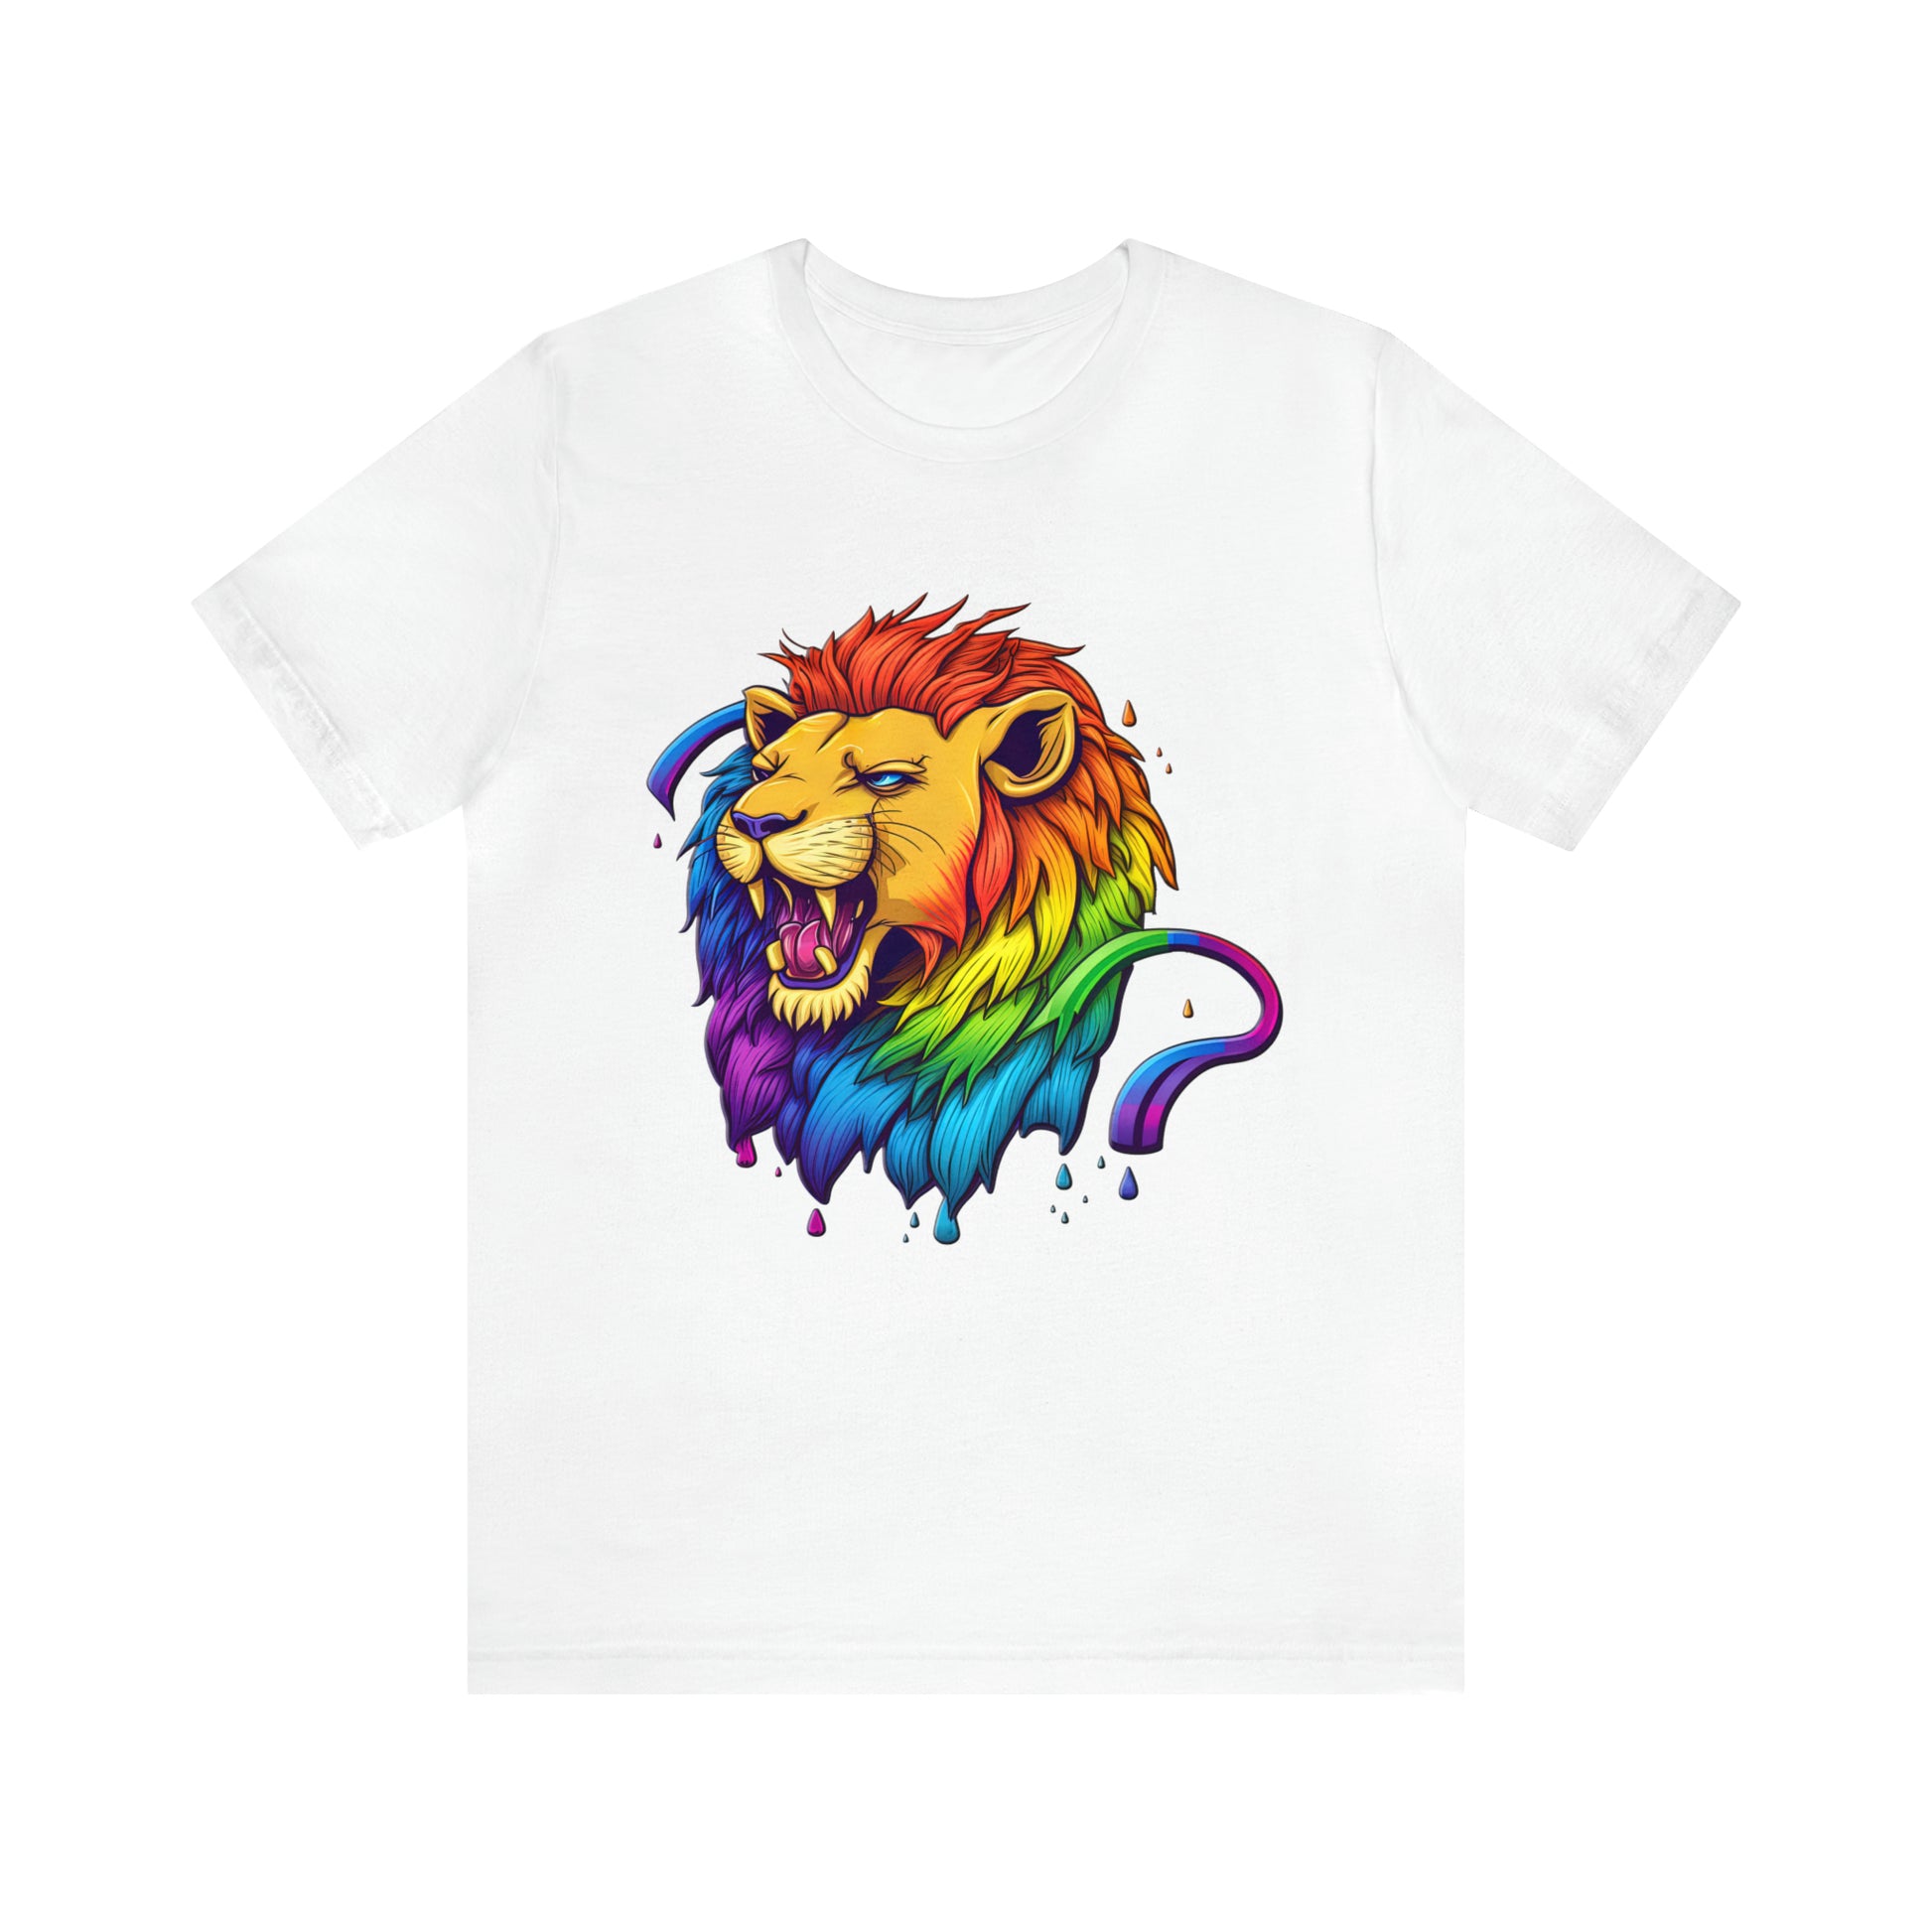 psychedelicBRANDz's Neon Jungle King featuring a majestic lion on a white shirt